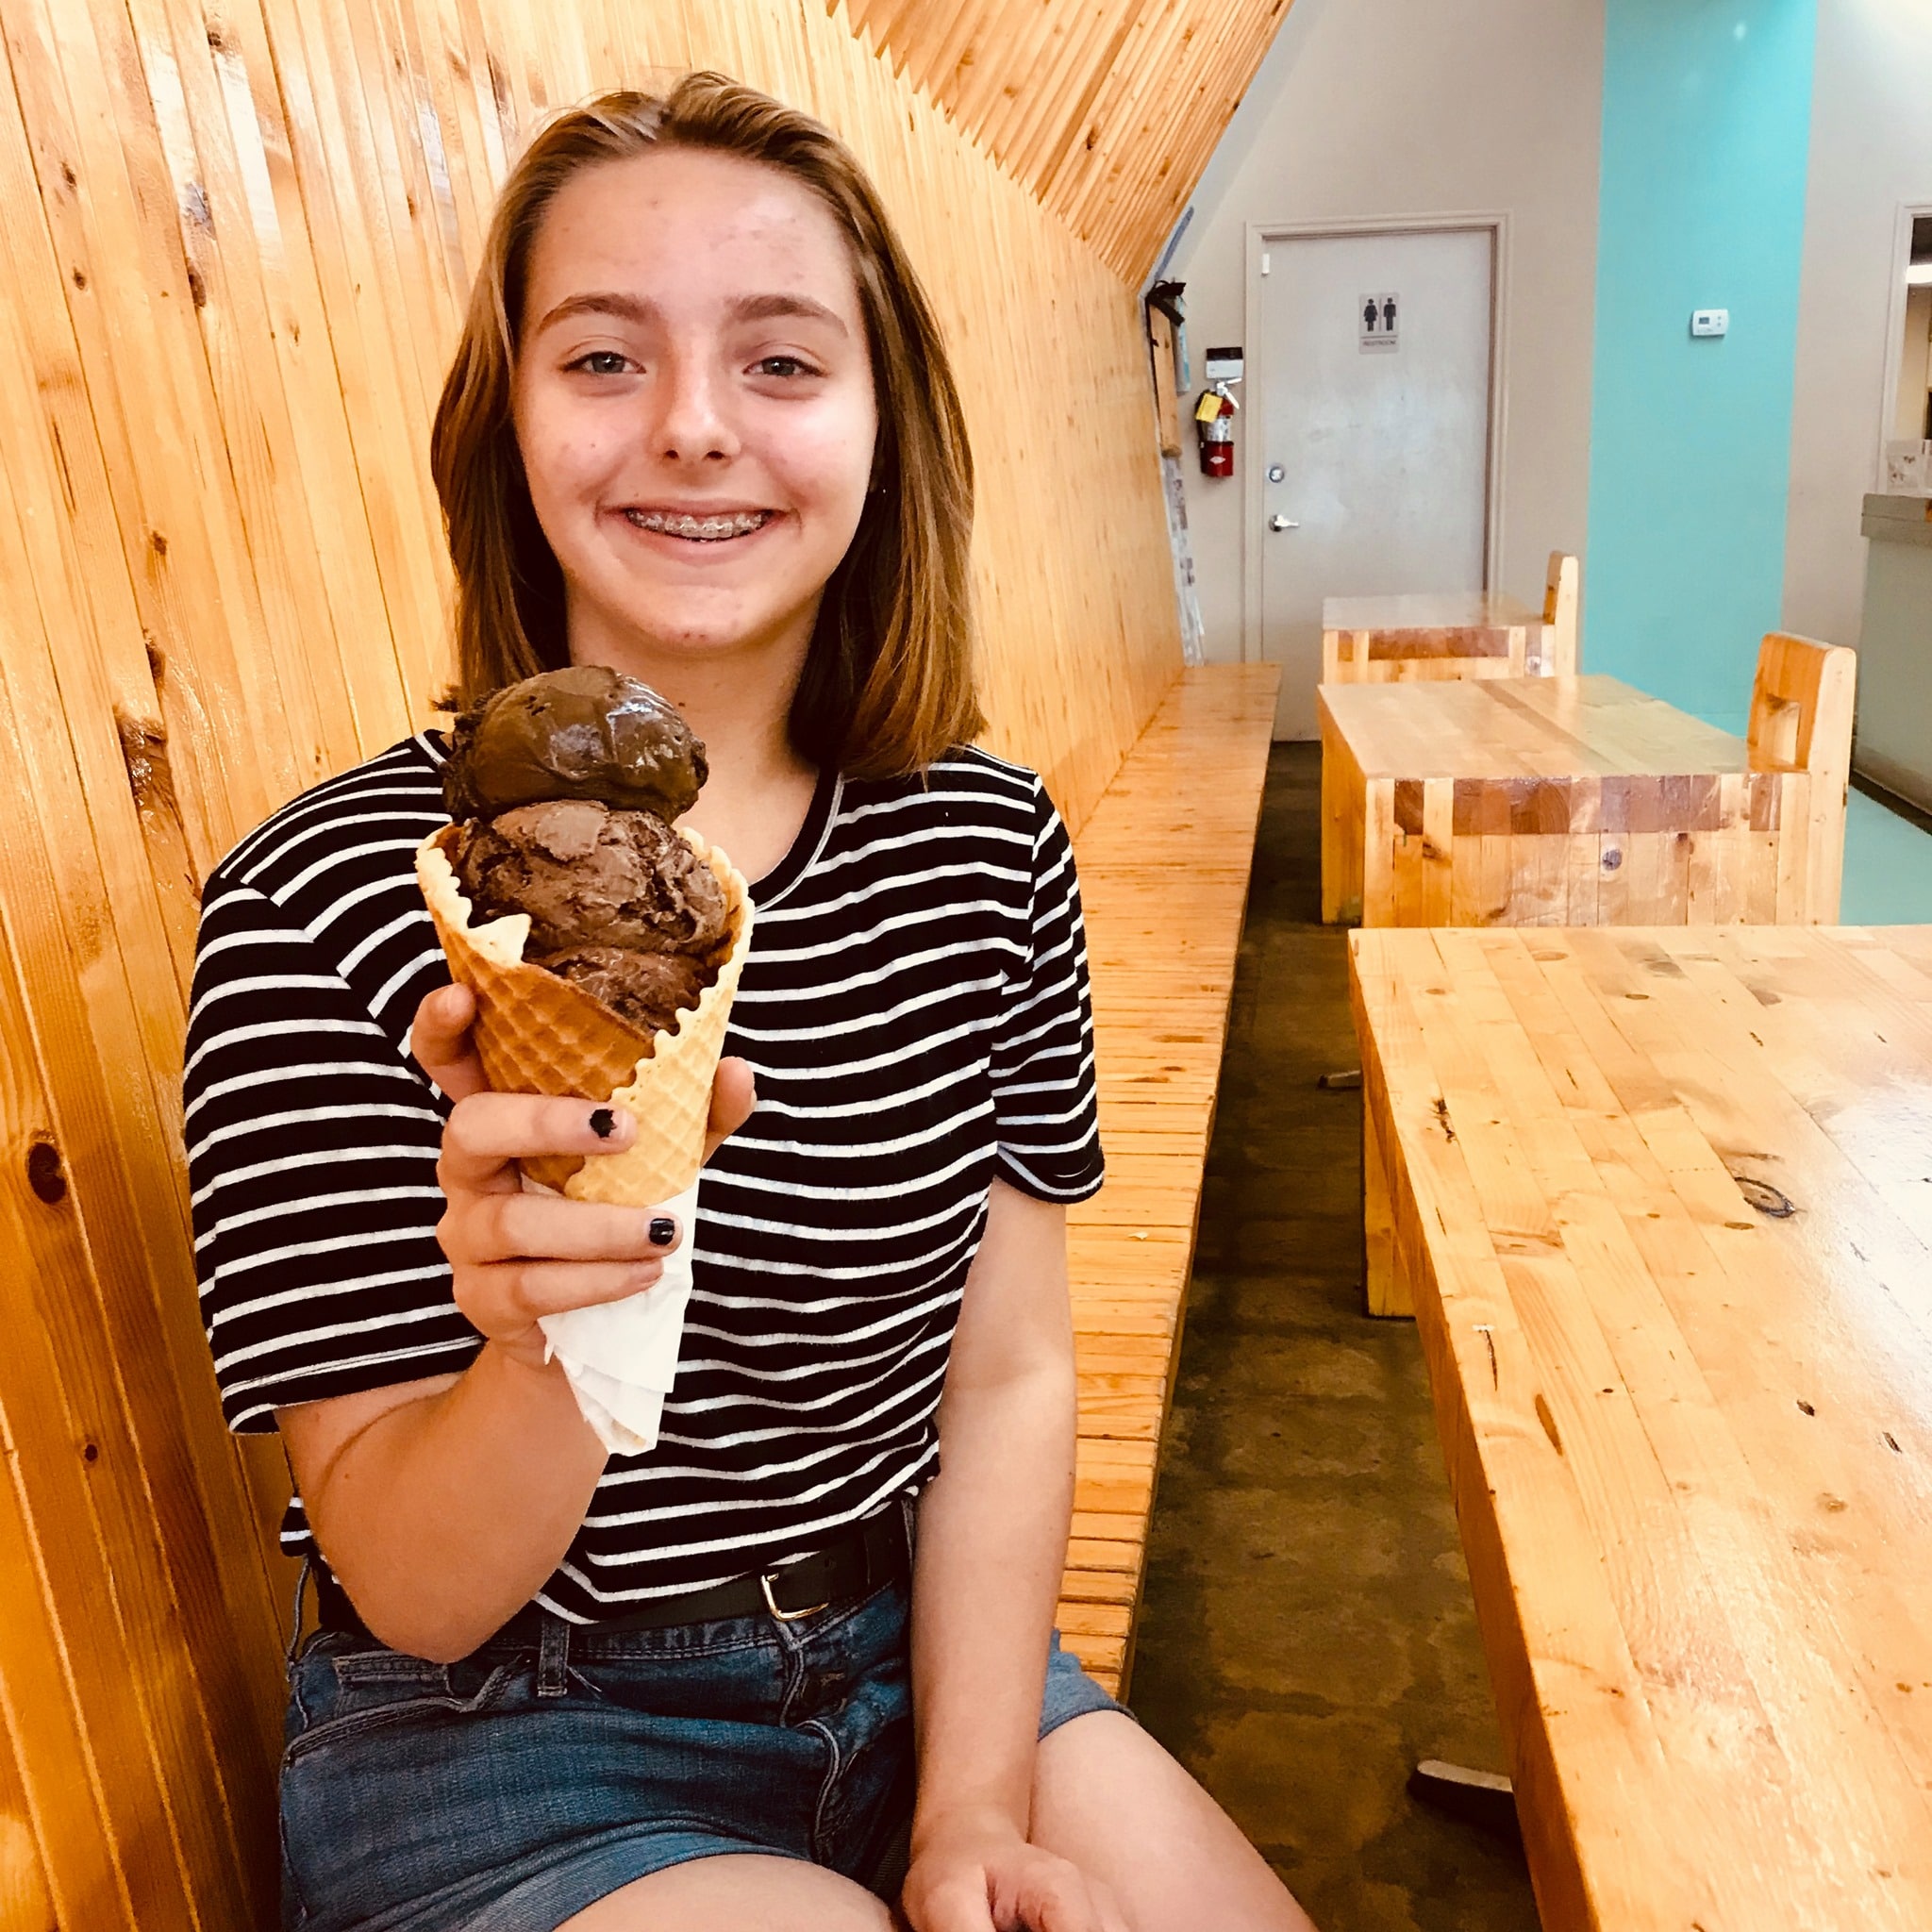 61890261 2275269052520869 3693480237414219776 o Here's your summer guide to 21 delicious ice cream shops in Birmingham